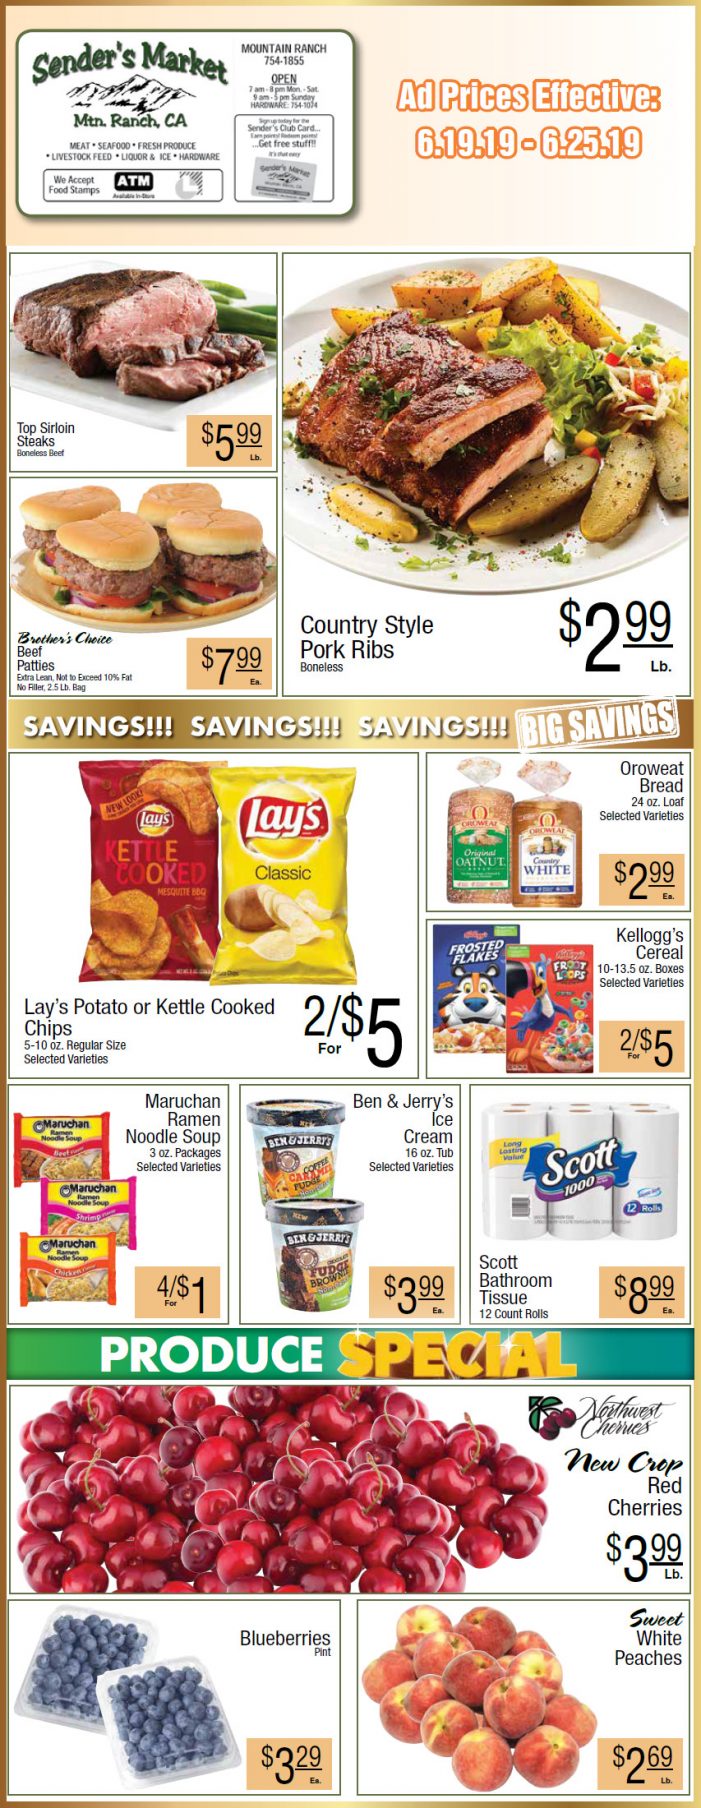 Sender’s Market Weekly Ad & Grocery Specials Through June 25